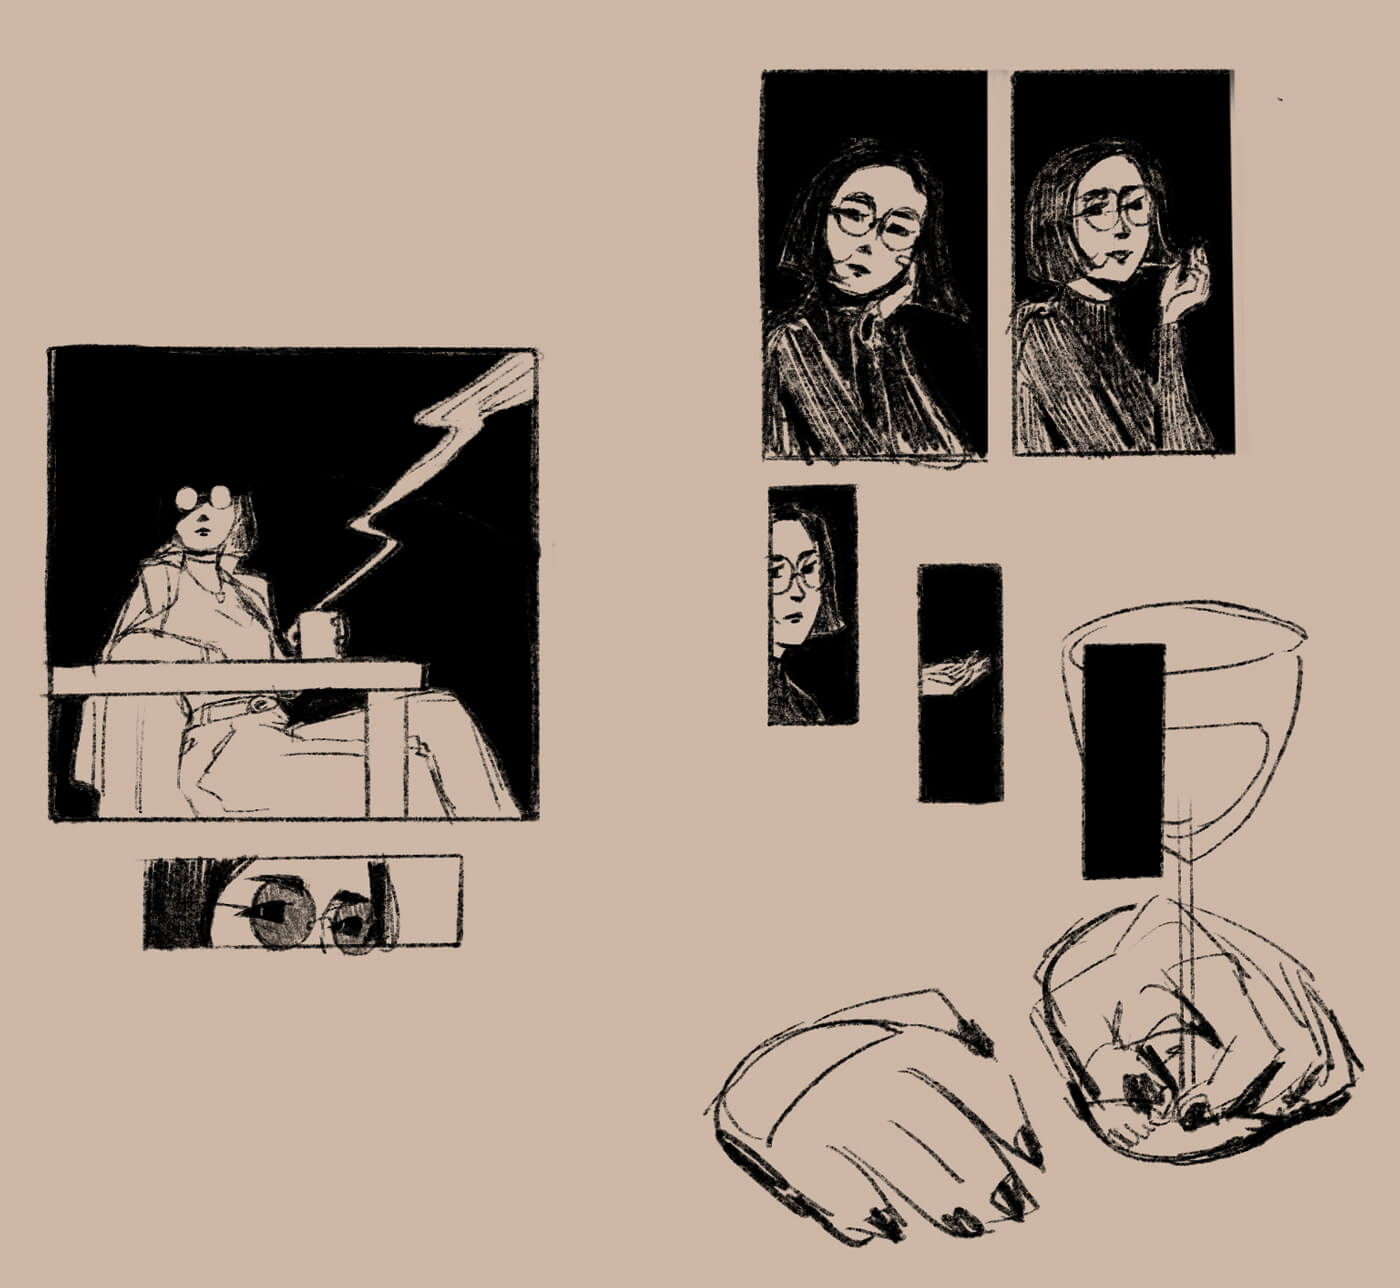 Thumbnails with more refined artwork.